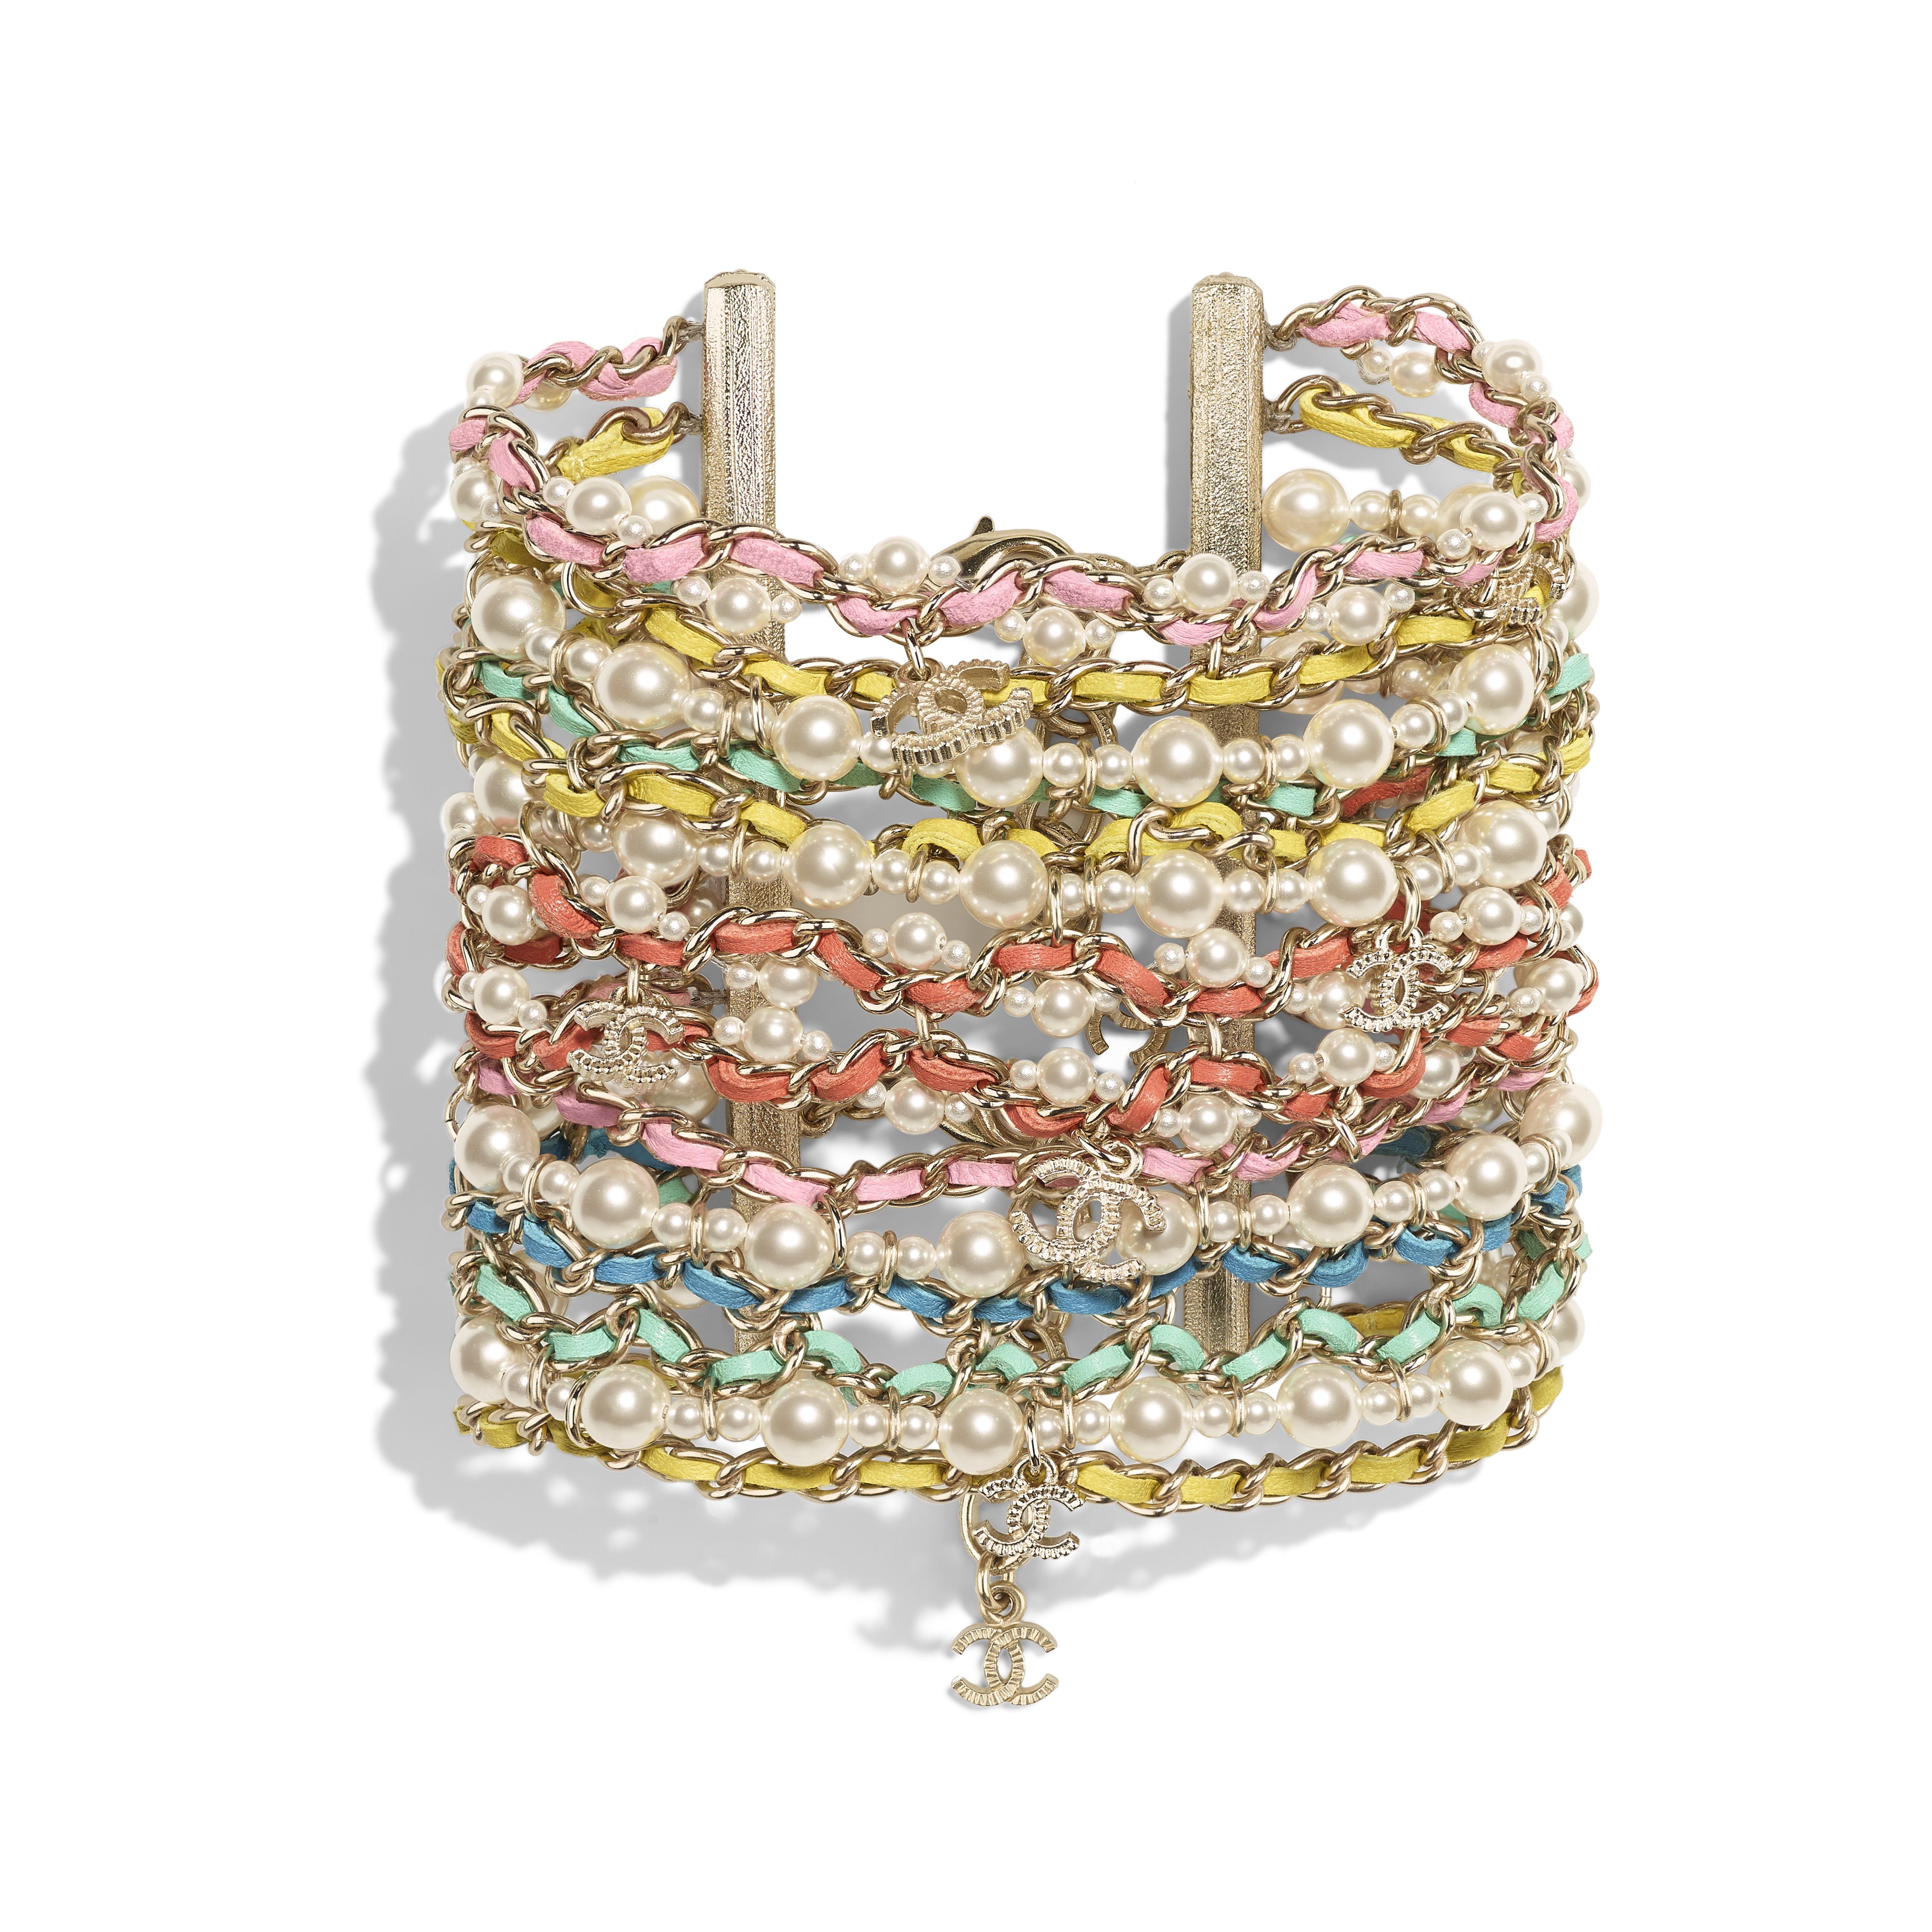 Chanel Multi-colored gold chain and leather bracelet with glass beads